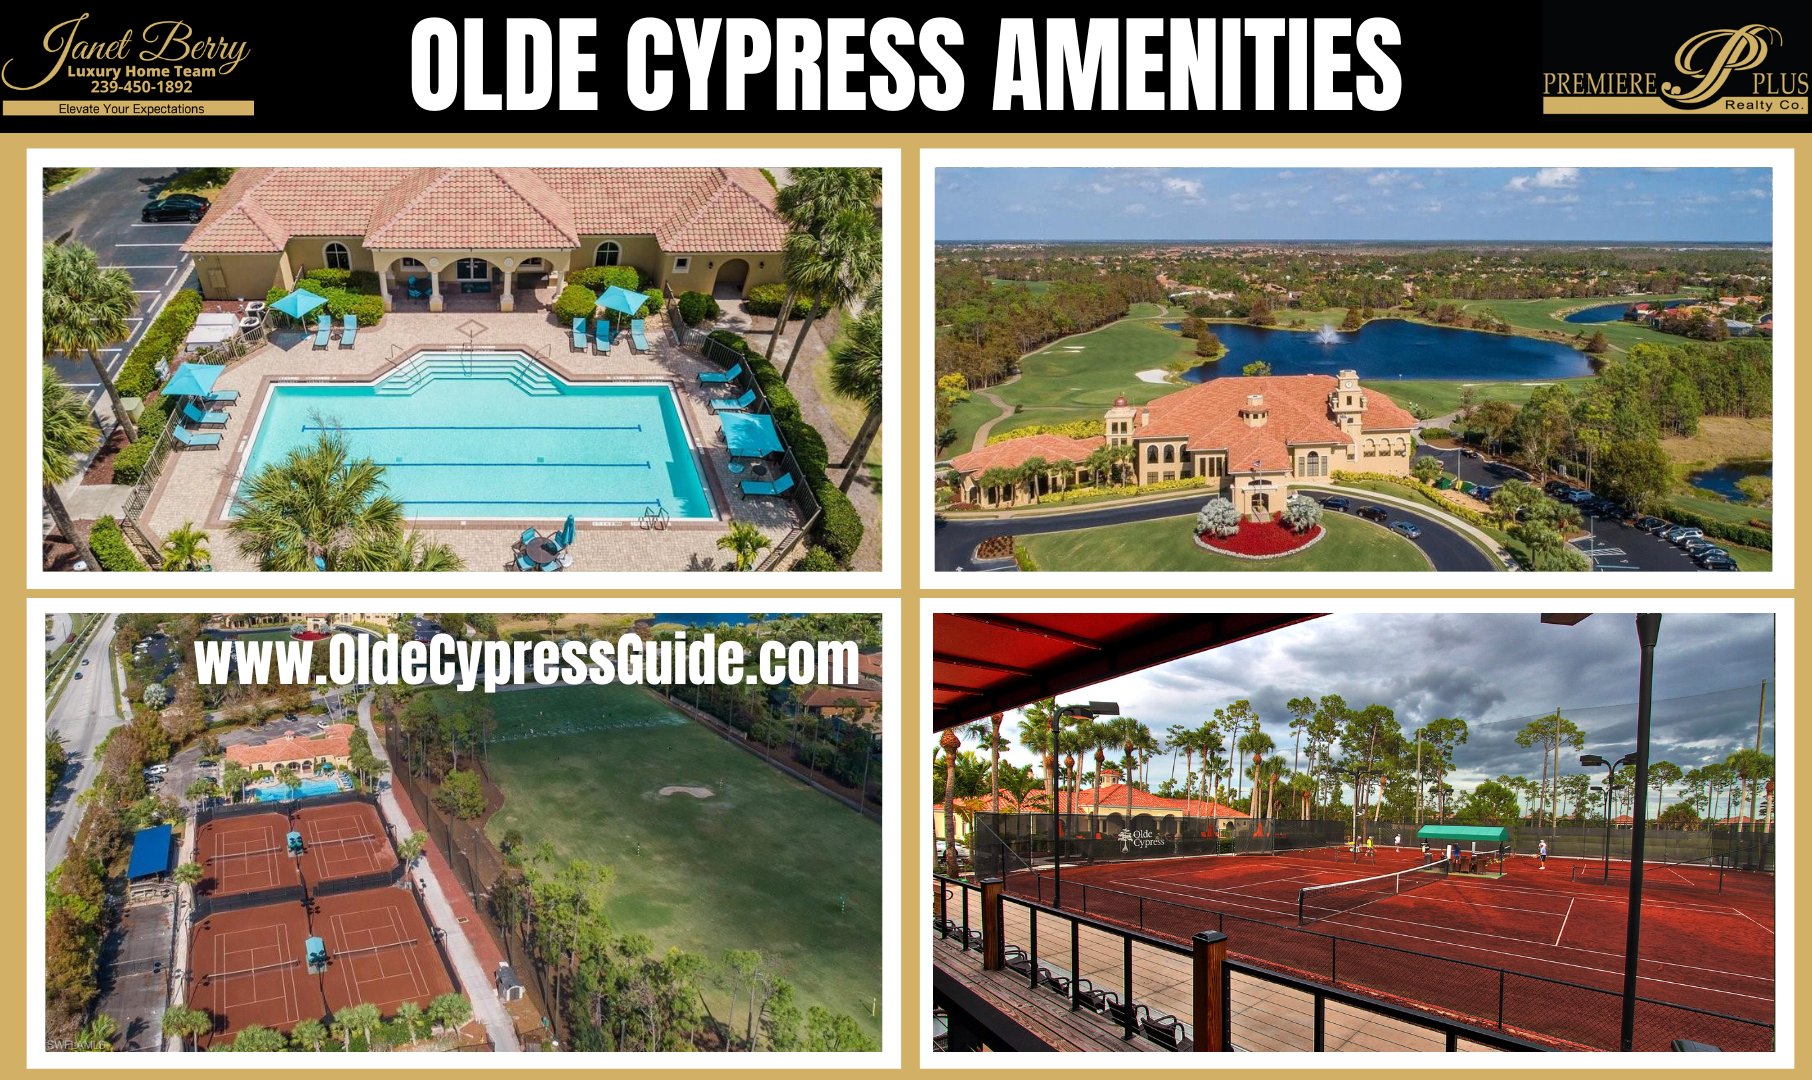 Olde Cypress Naples Amenities and Club and Pool and Tennis.jpeg